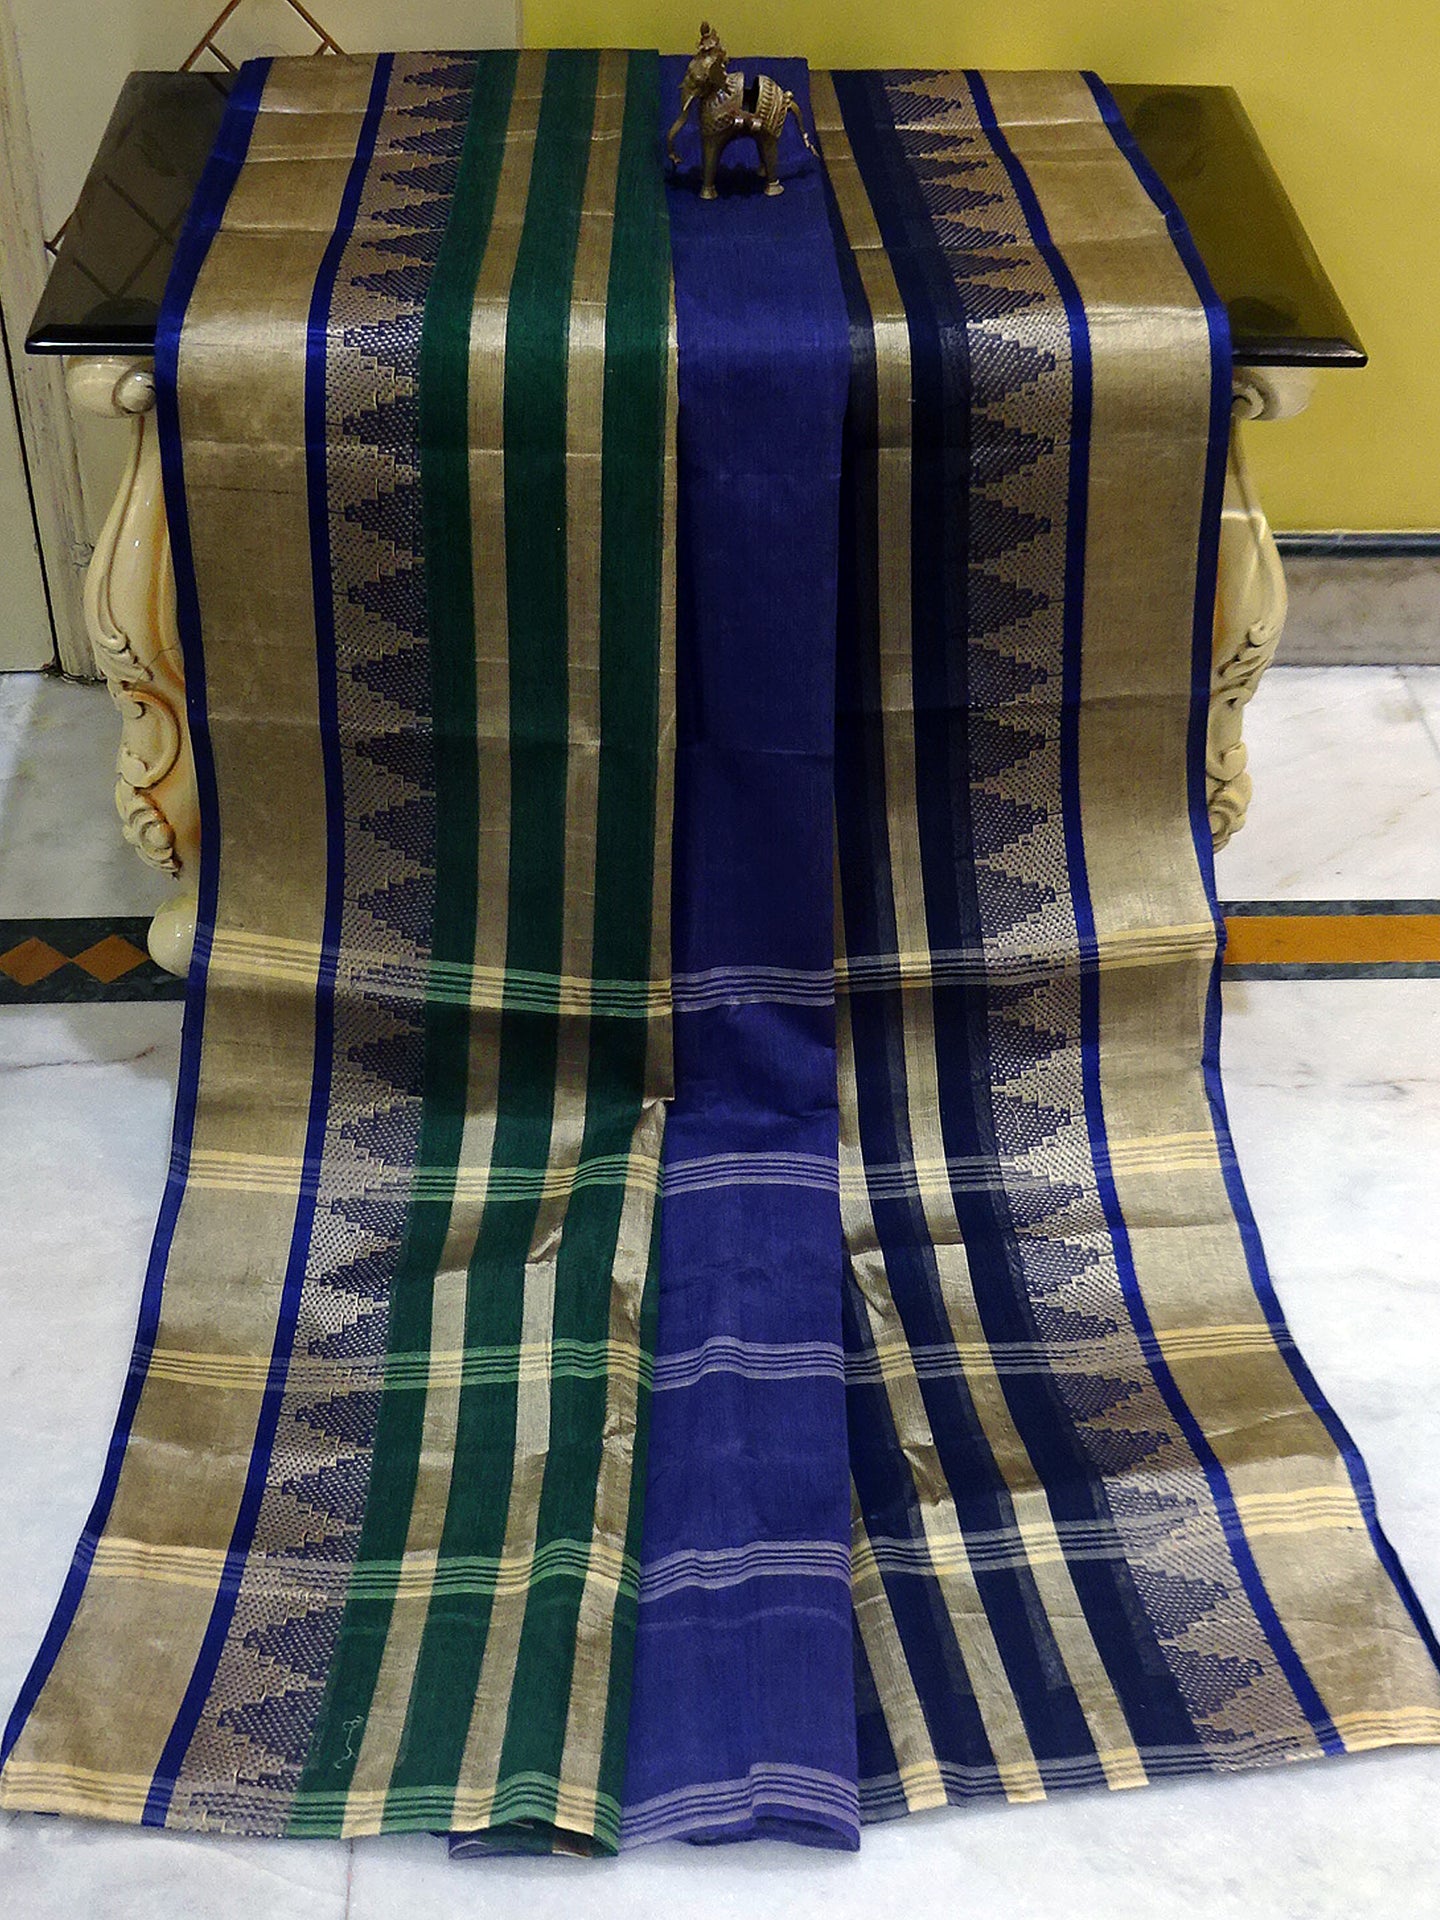 Temple Border Tangail Cotton Saree in Navy Blue, Dark Green and Beige with Stripes